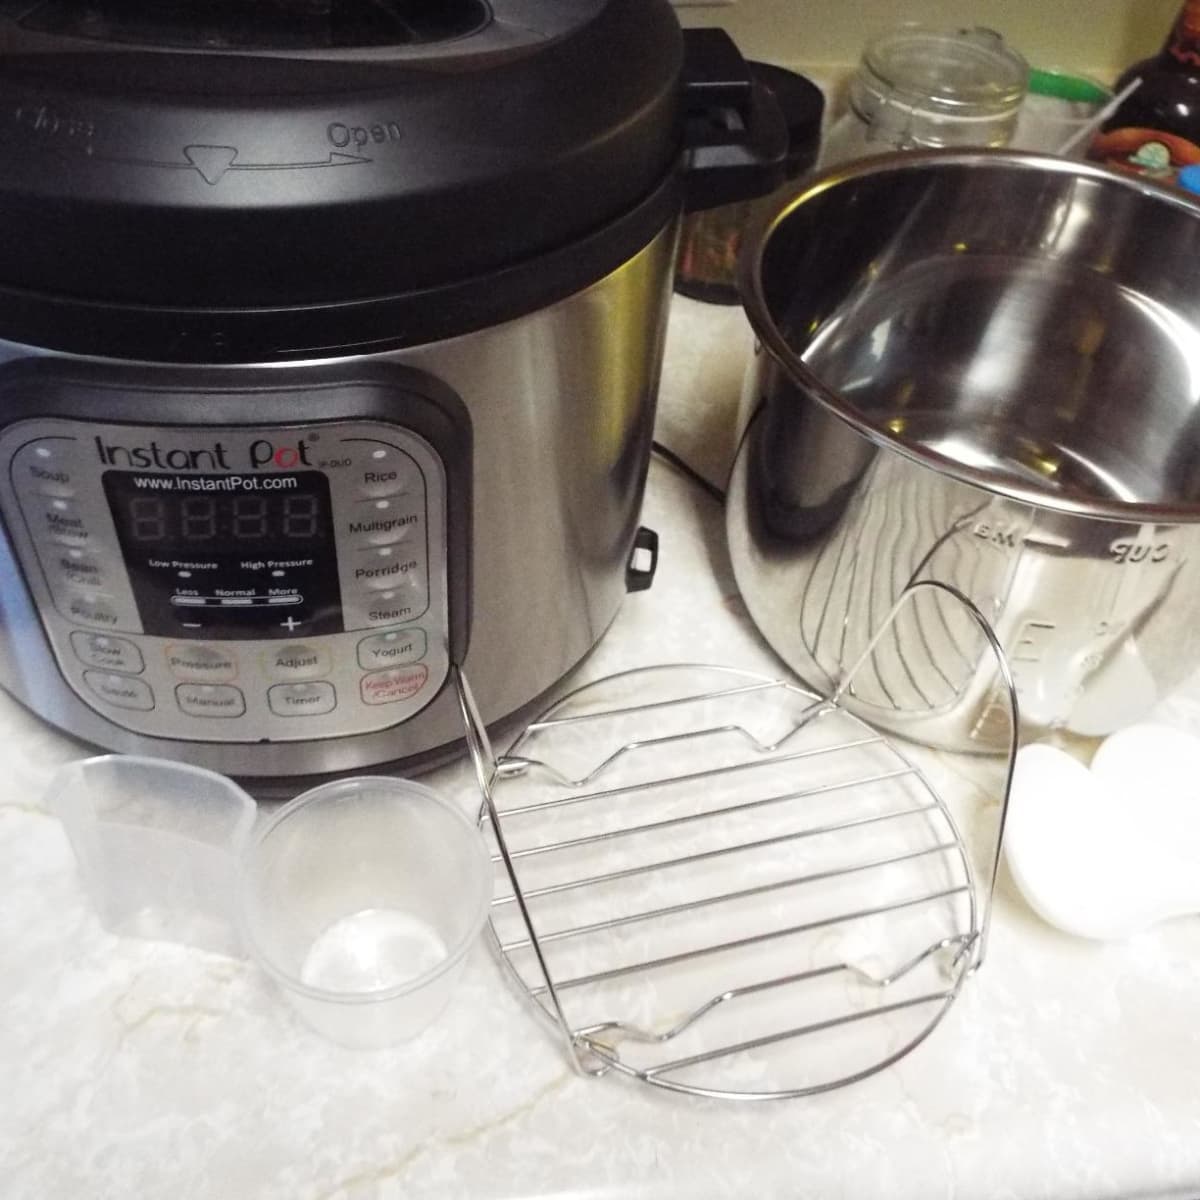 Instant Pot Duo V2 7-in-1 Electric Pressure Cooker review